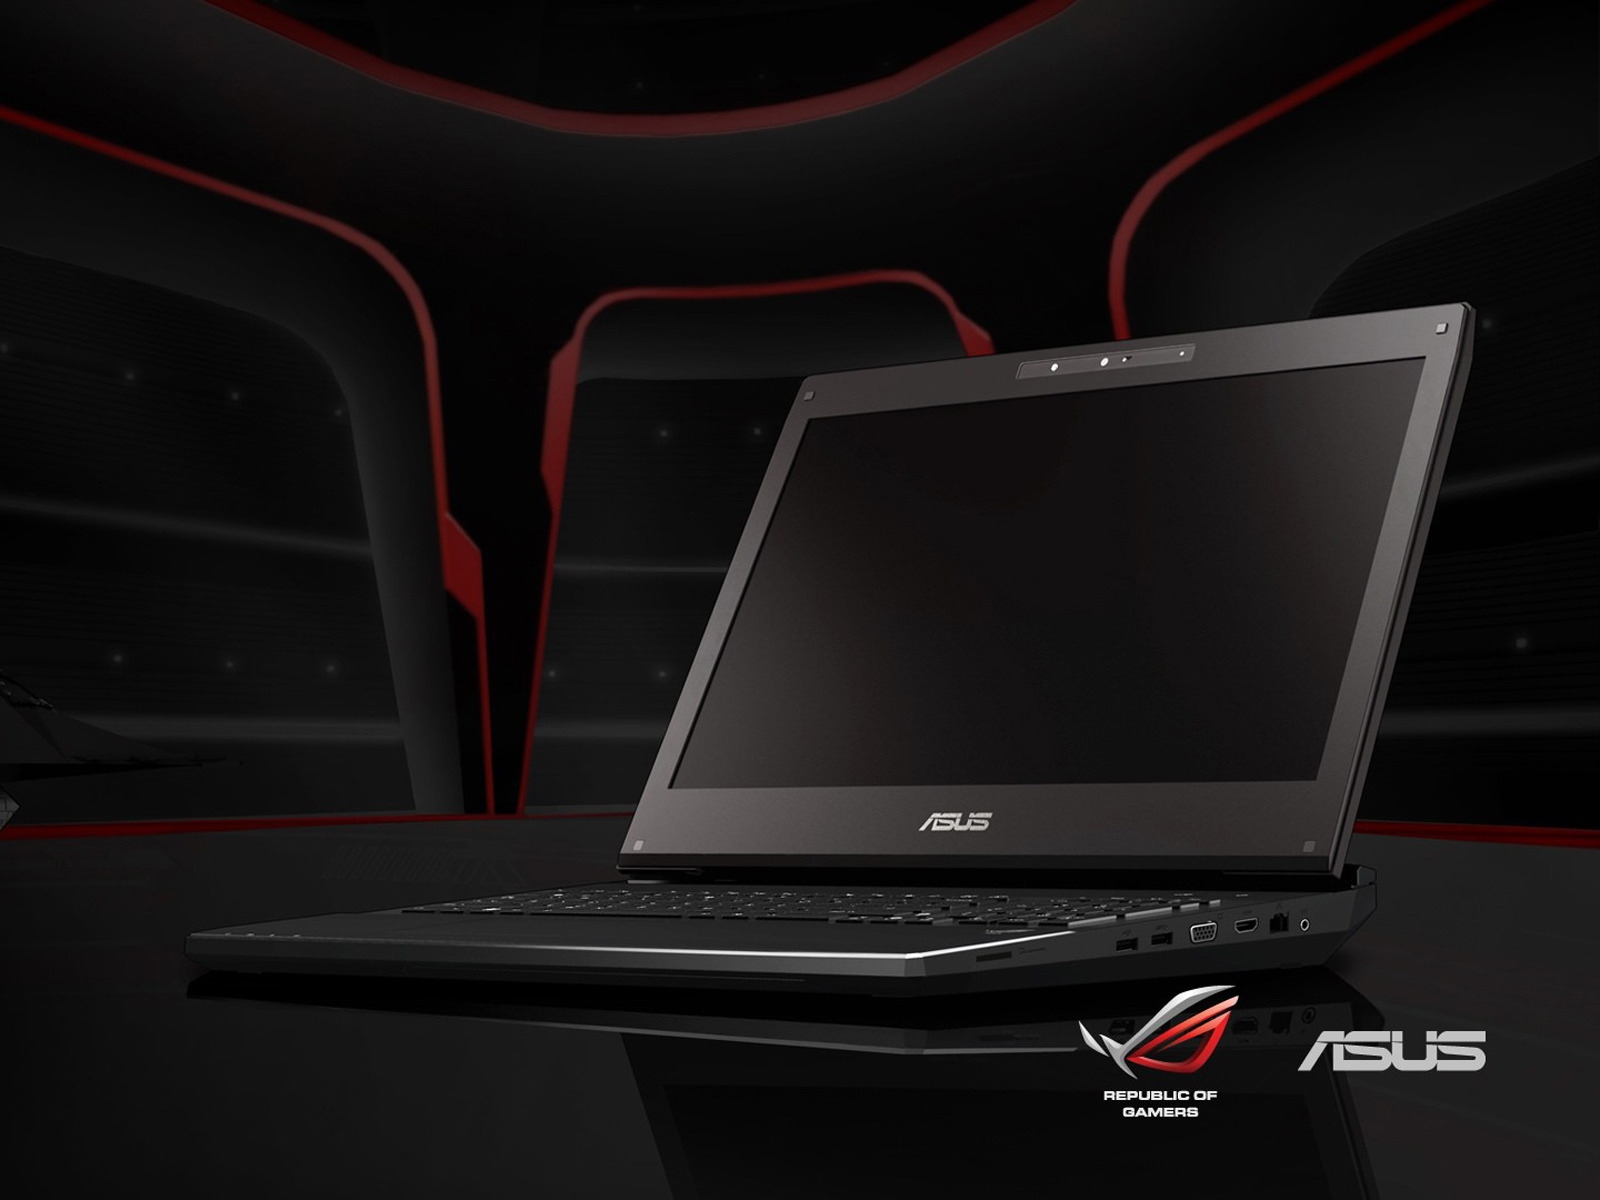 Asus Notebook for 1600 x 1200 resolution